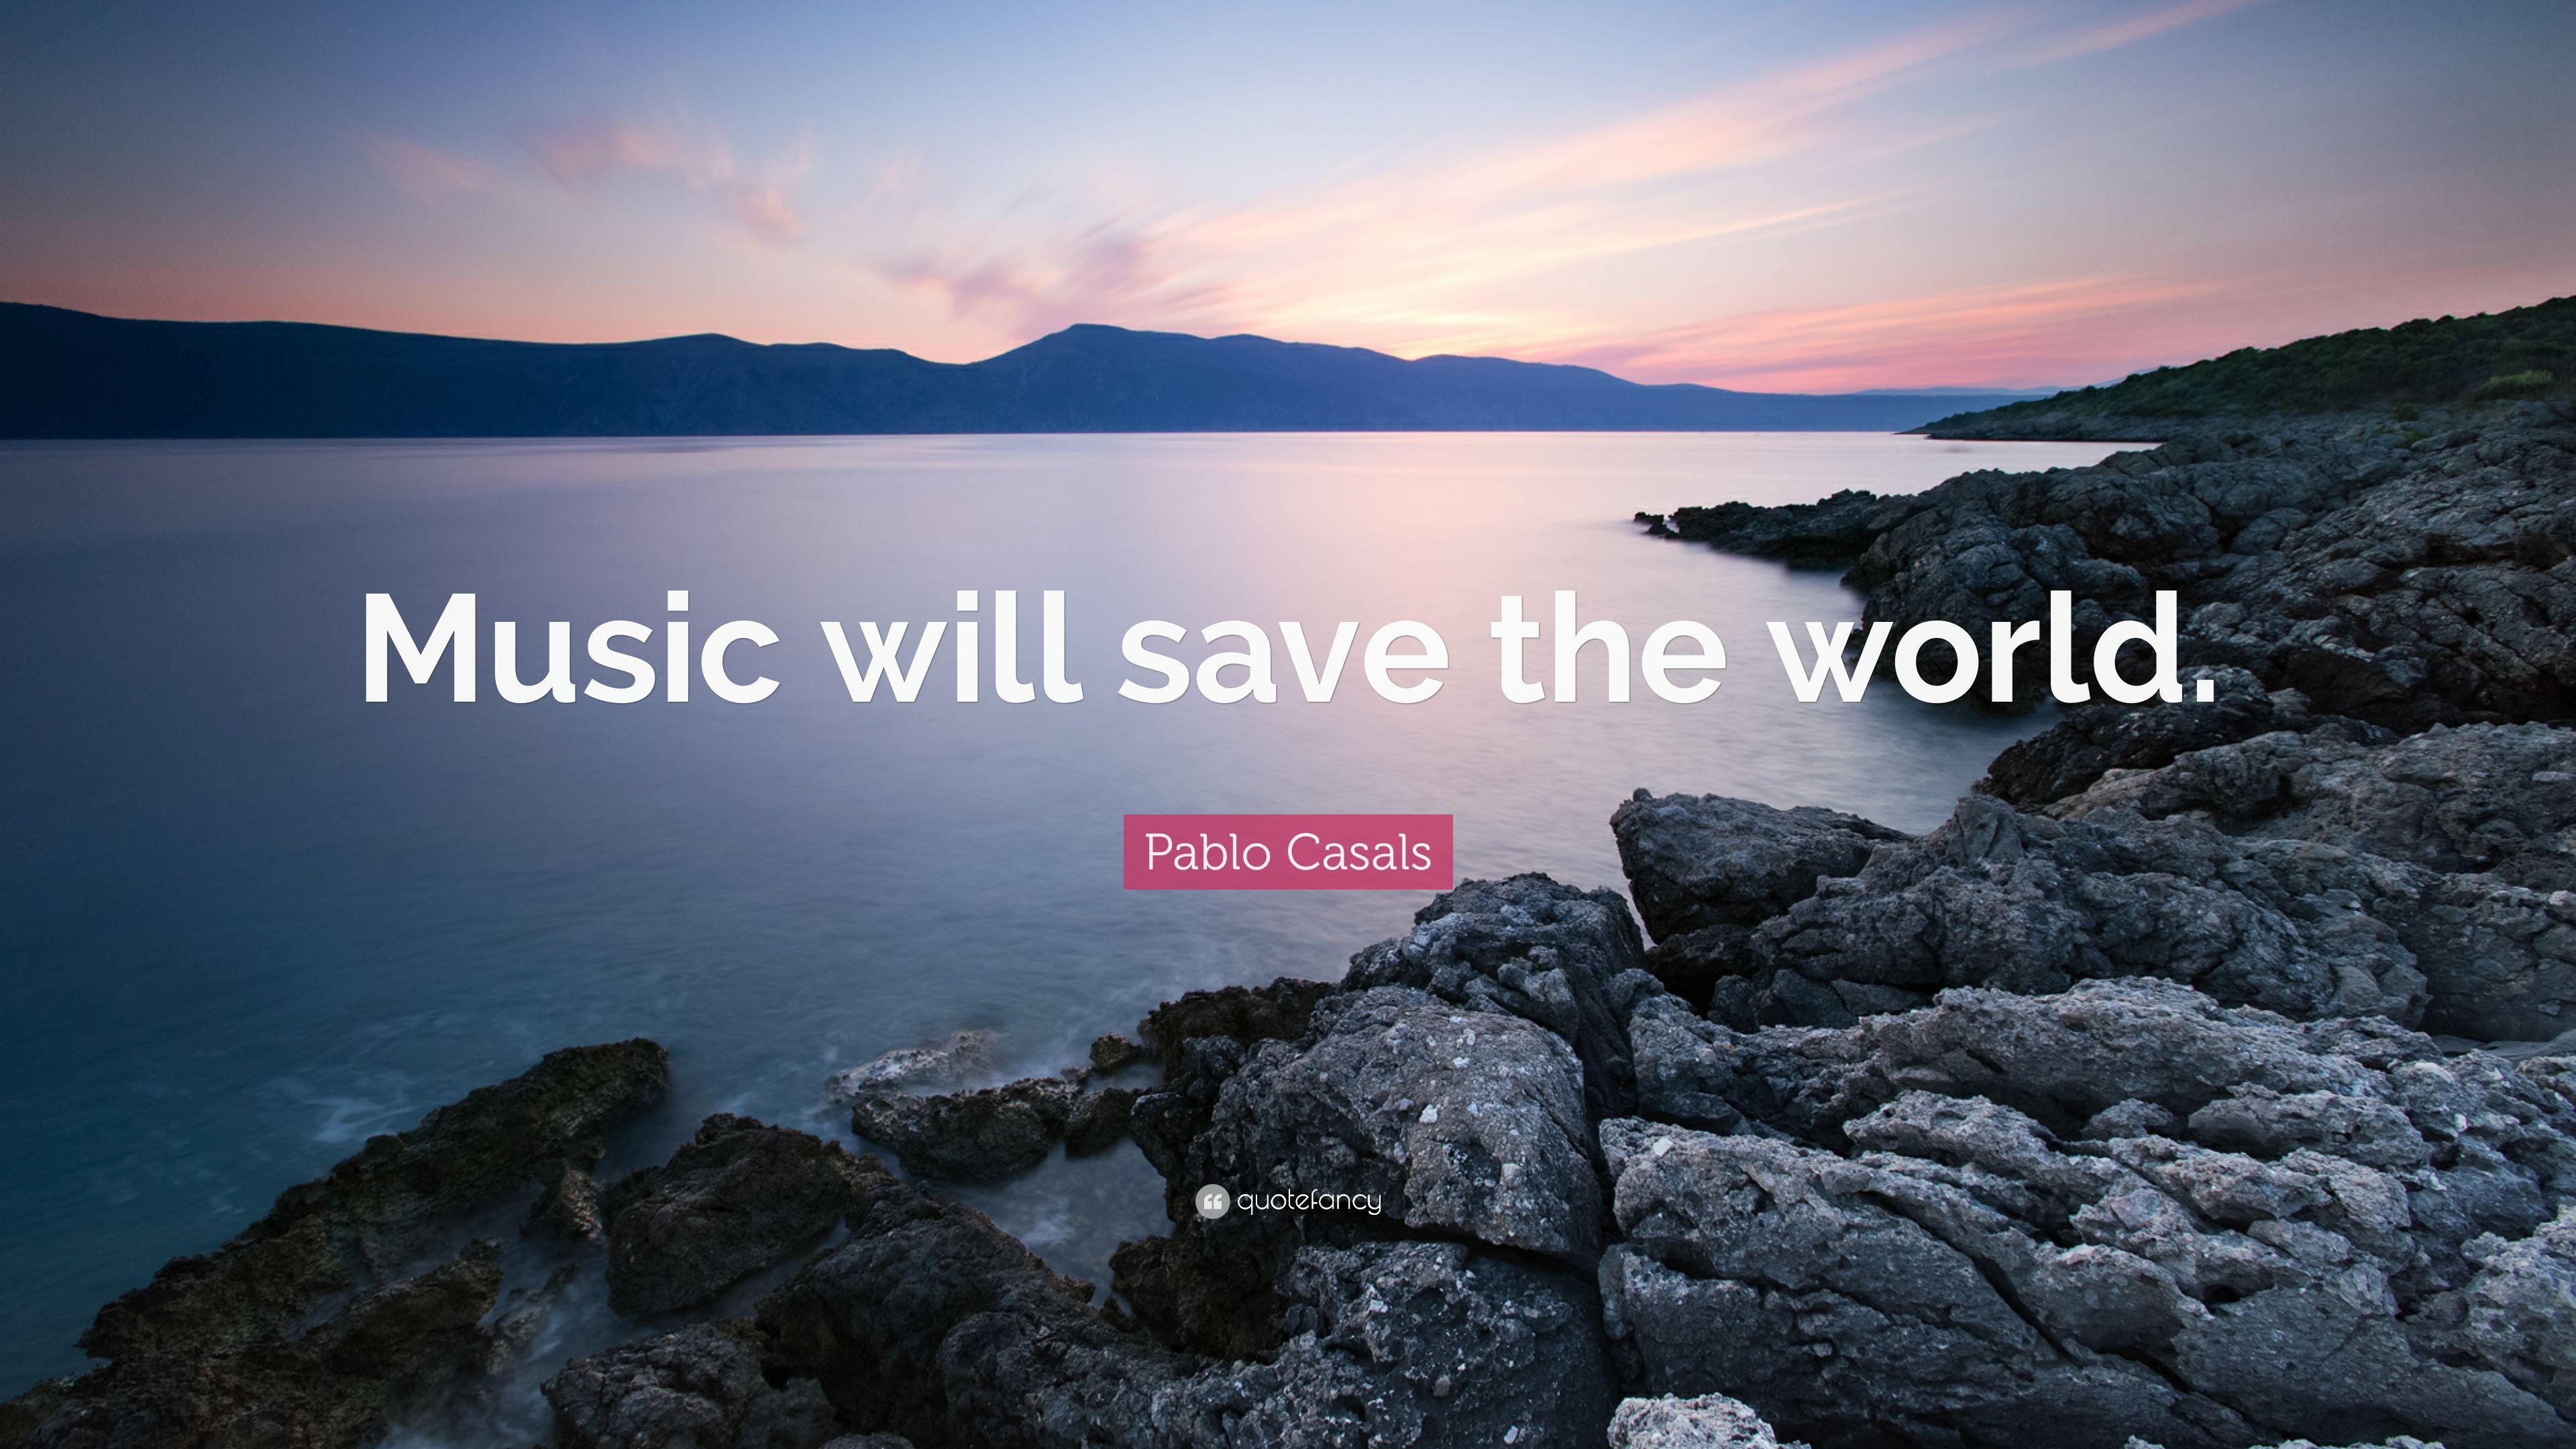 Pablo Casals Quote: “Music will save the world.” 9 wallpaper